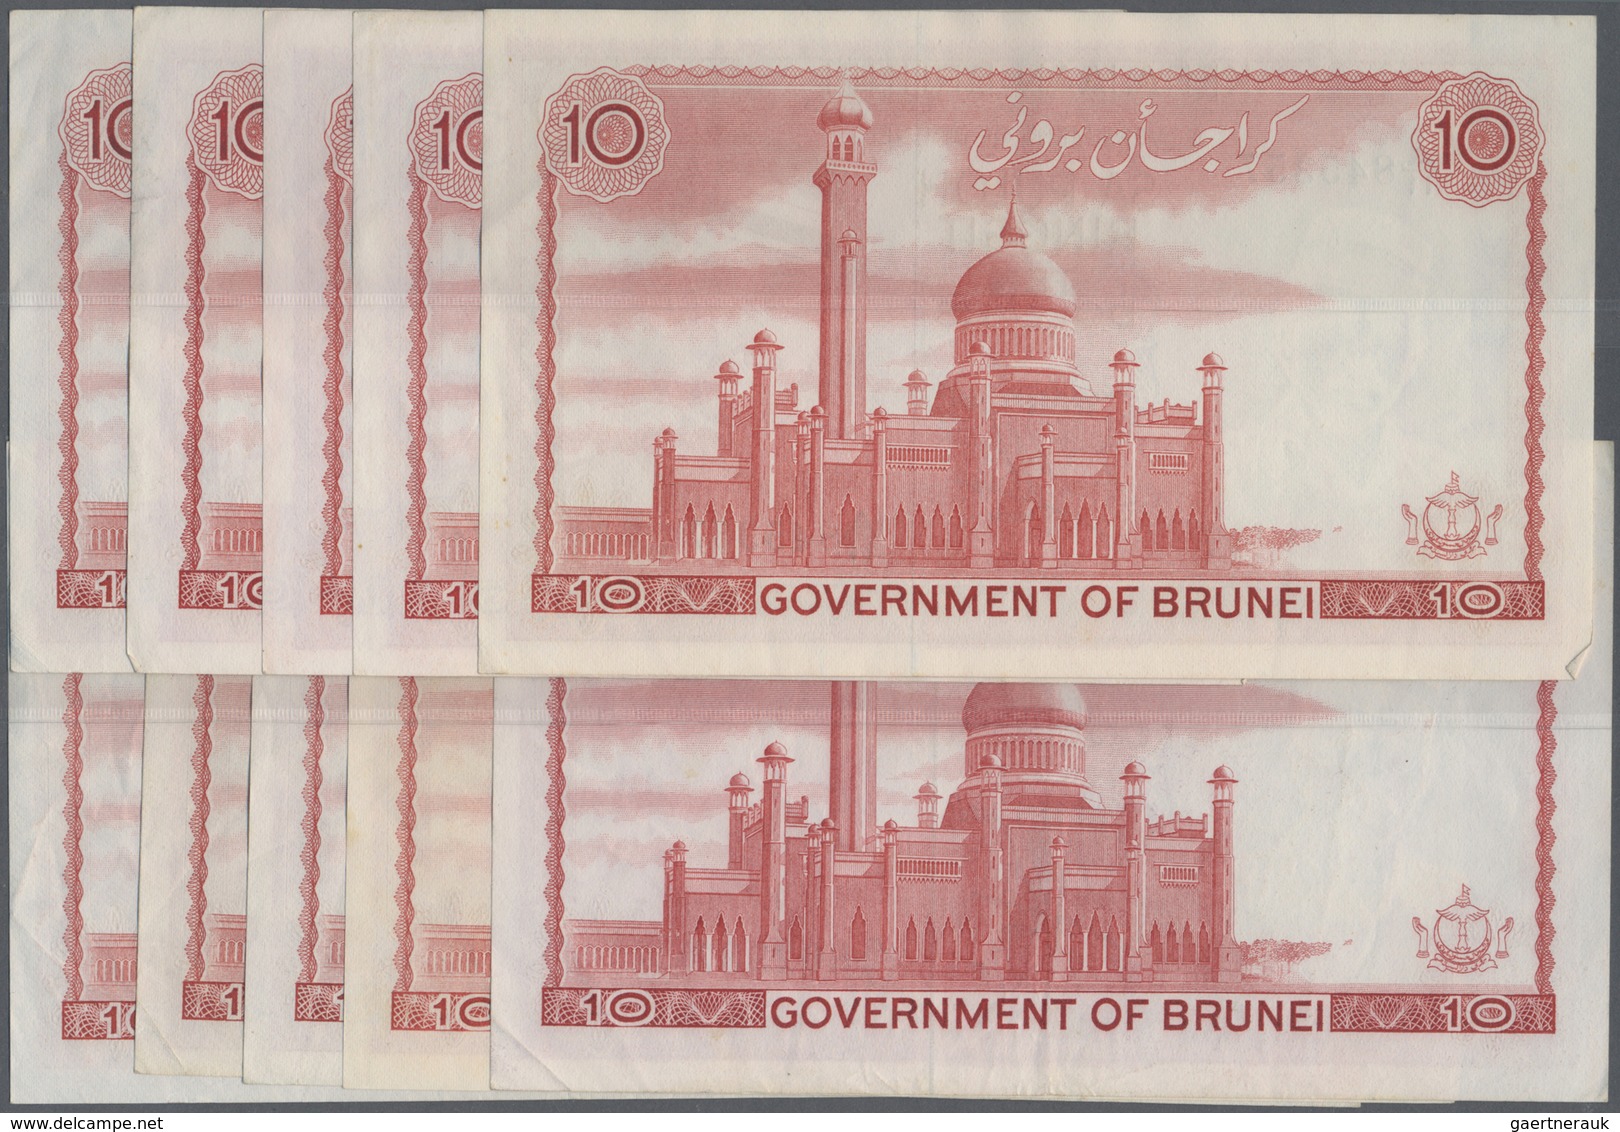 Brunei: Set With 10 Pcs. 10 Ringgit 1986, P.8 In About VF Condition (10 Pcs.) - Brunei